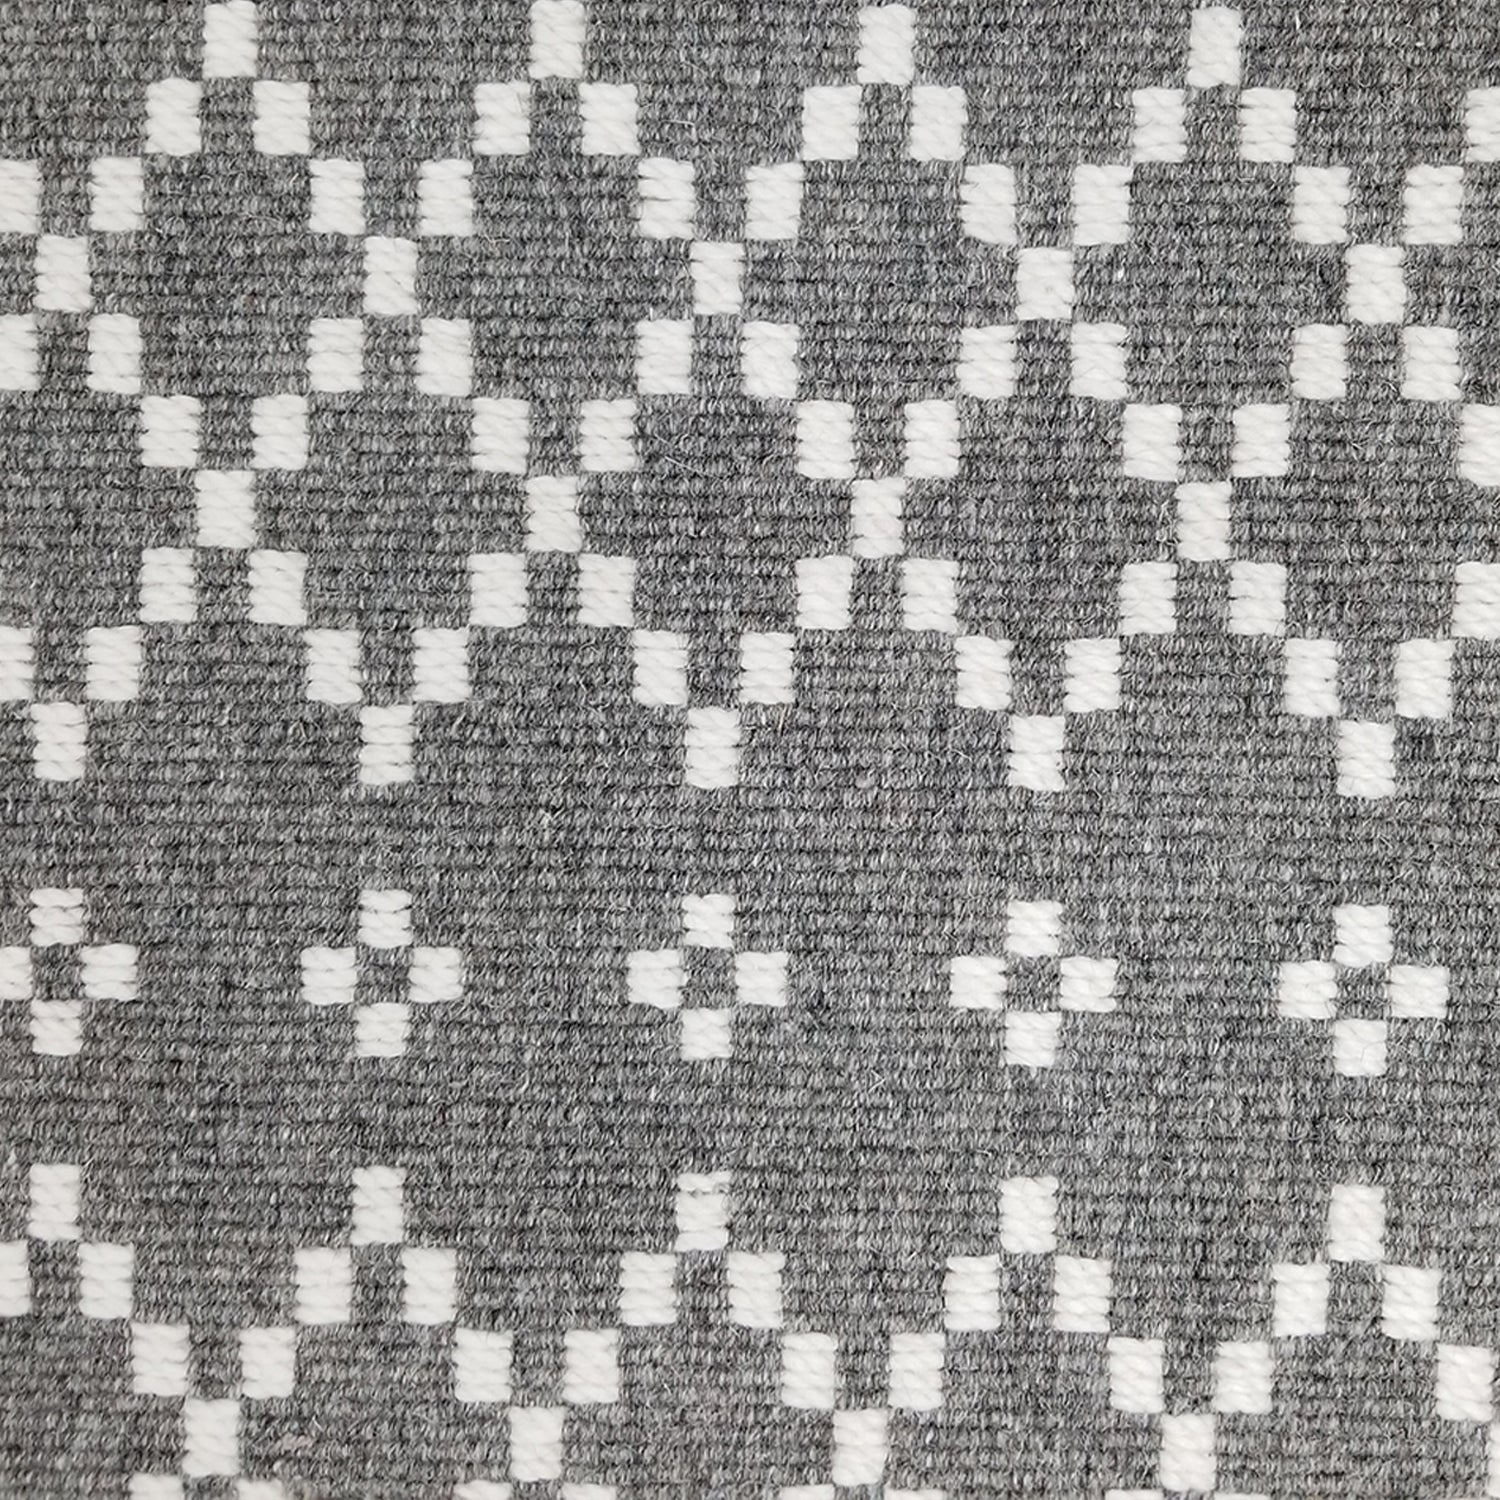 Wool broadloom carpet swatch in a repeating diamond print in white on a gray field.